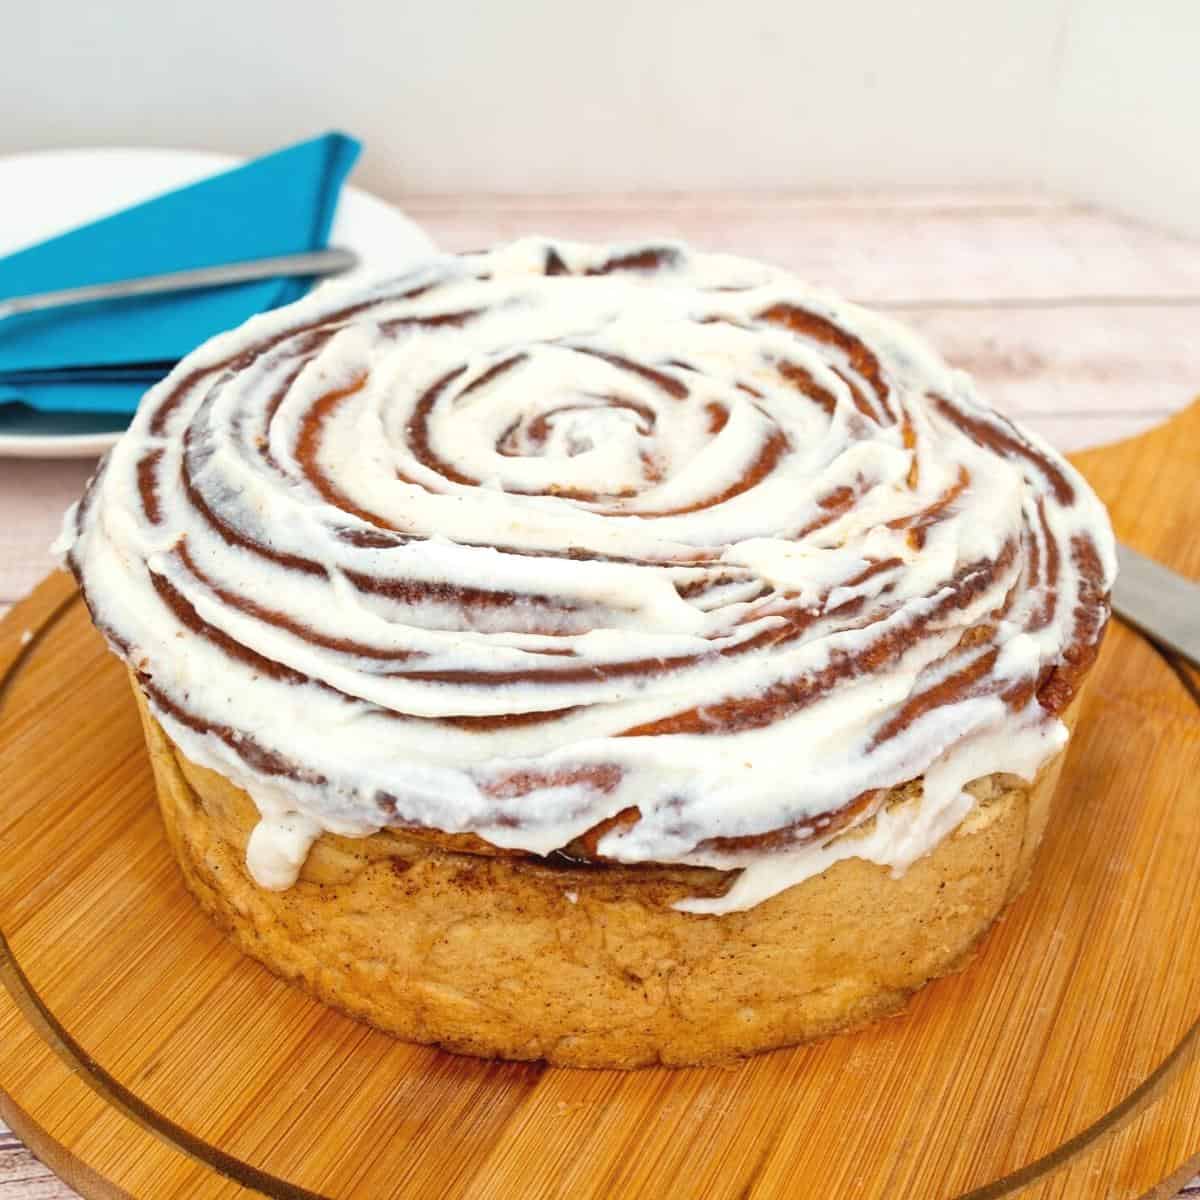 A giant cinnamon roll on the wooden board.